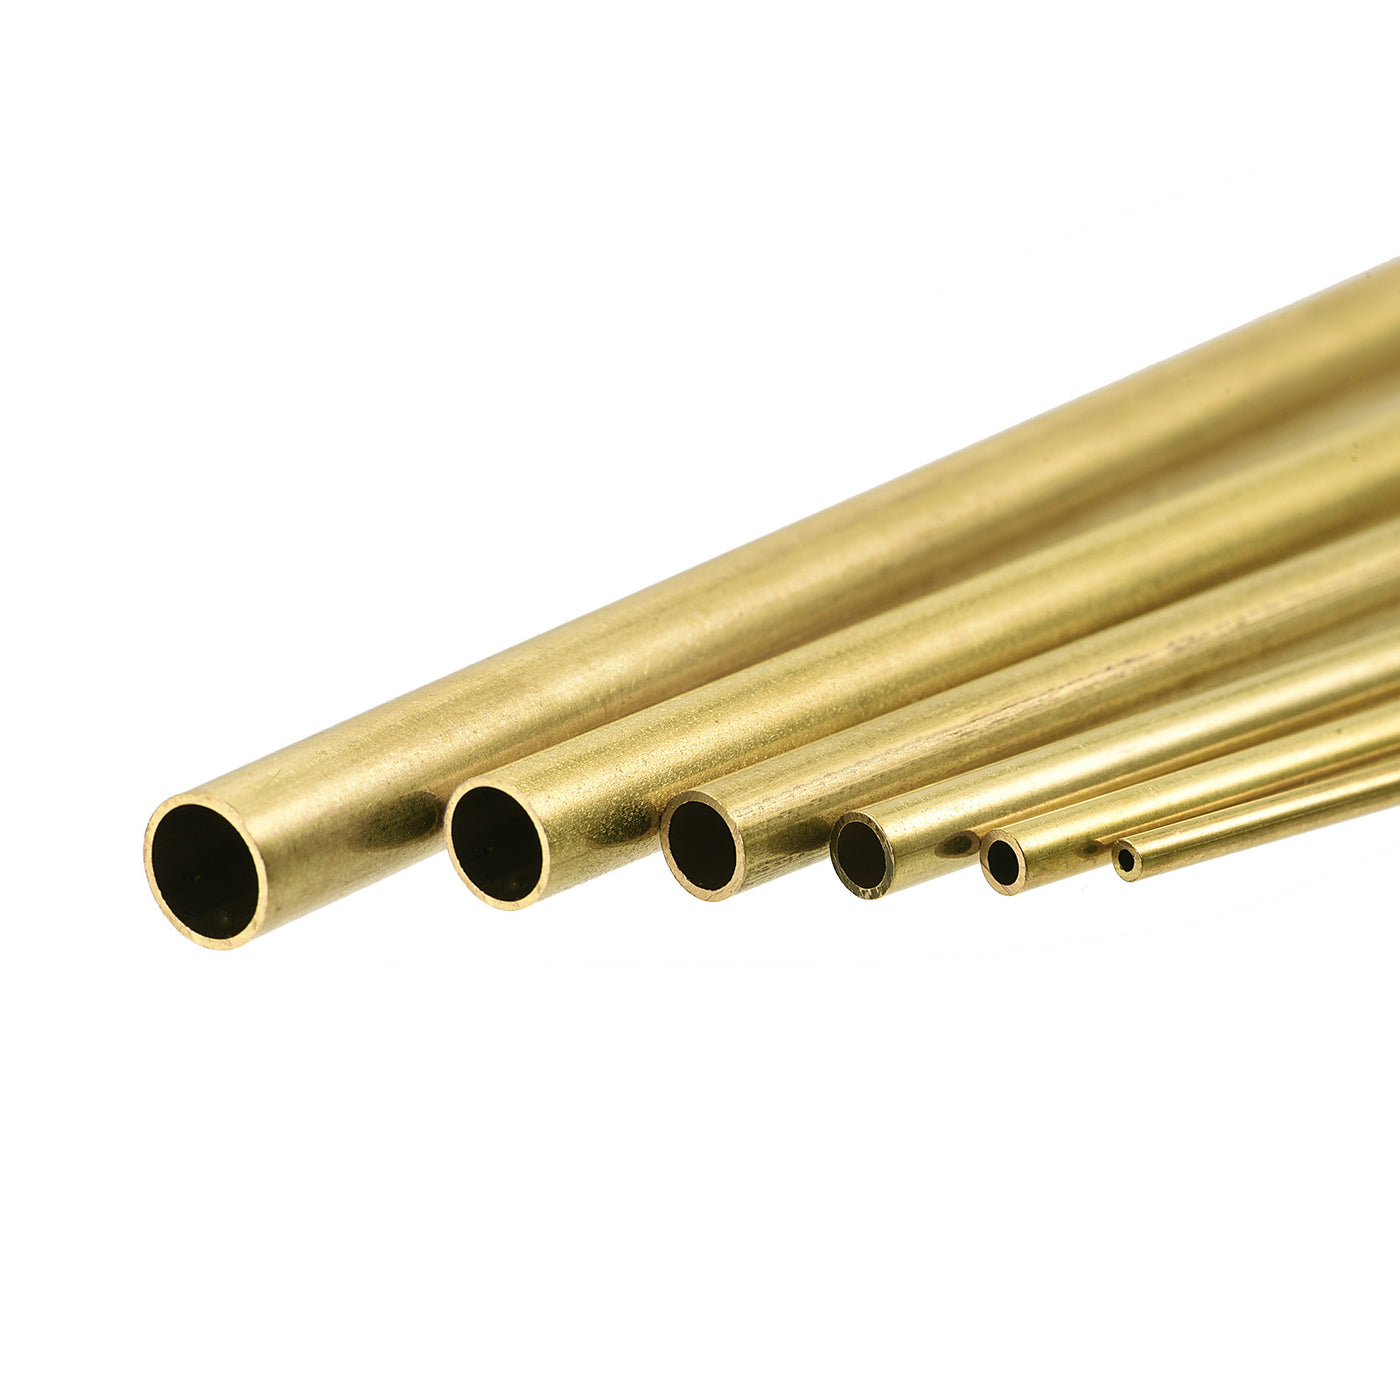 uxcell Uxcell Brass Tube, 2.5mm 3.5mm 4.5mm 5.5mm 6.5mm 7.5mm OD x 0.5mm Wall Thickness 300mm Length Metal Tubing, Pack of 6